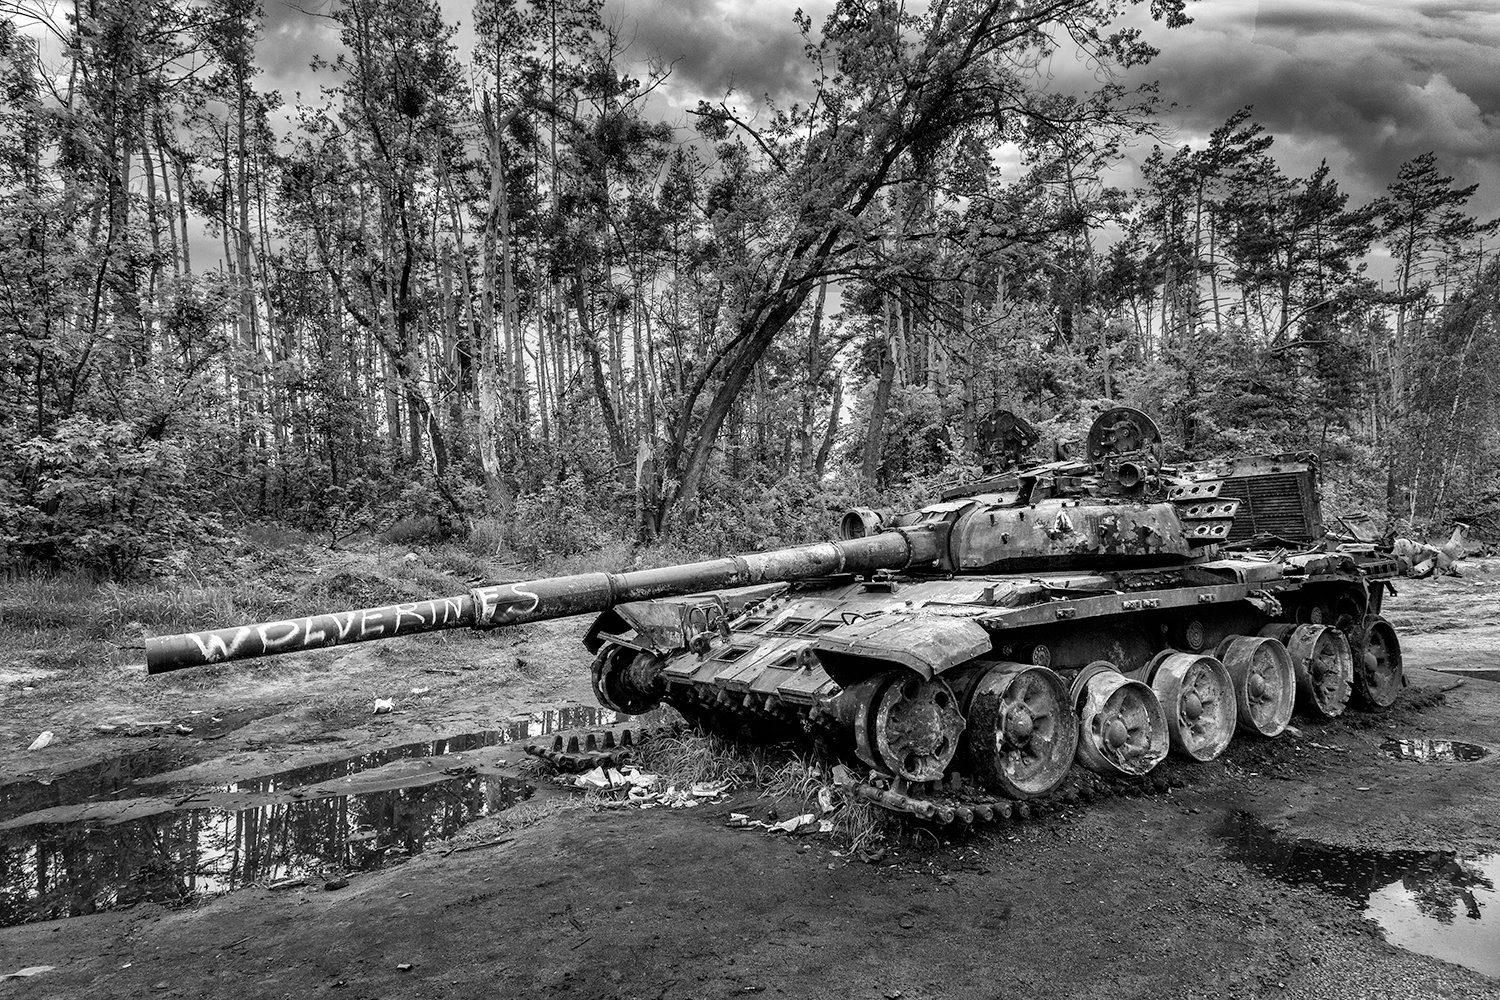 A Russian T-72 tank destroyed near Kyiv in 2022 during the war in Ukraine Photography Pierre Toutain-Dorbec.jpg